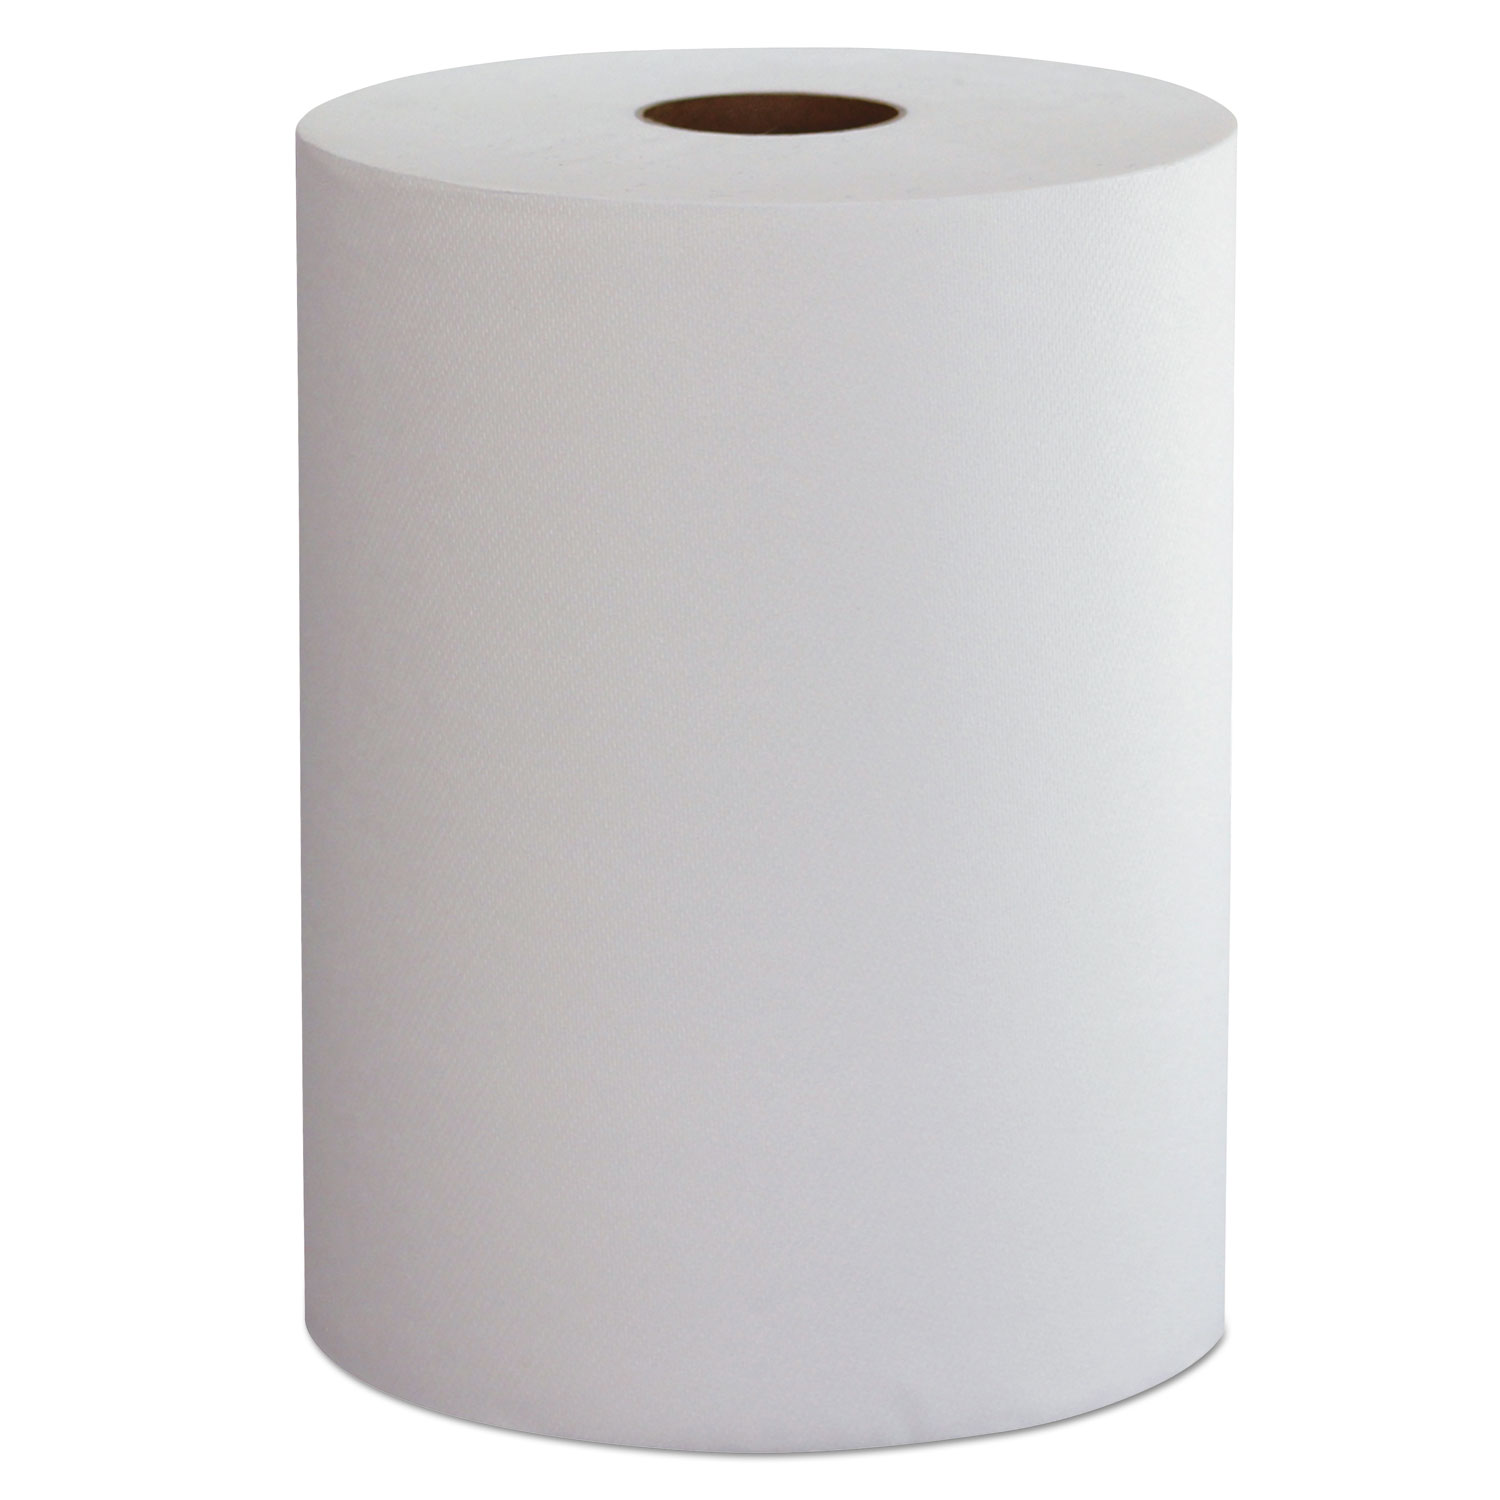 Morcon Hardwound Roll Towels - 1-Ply, 10 x 800', White, 6/Case